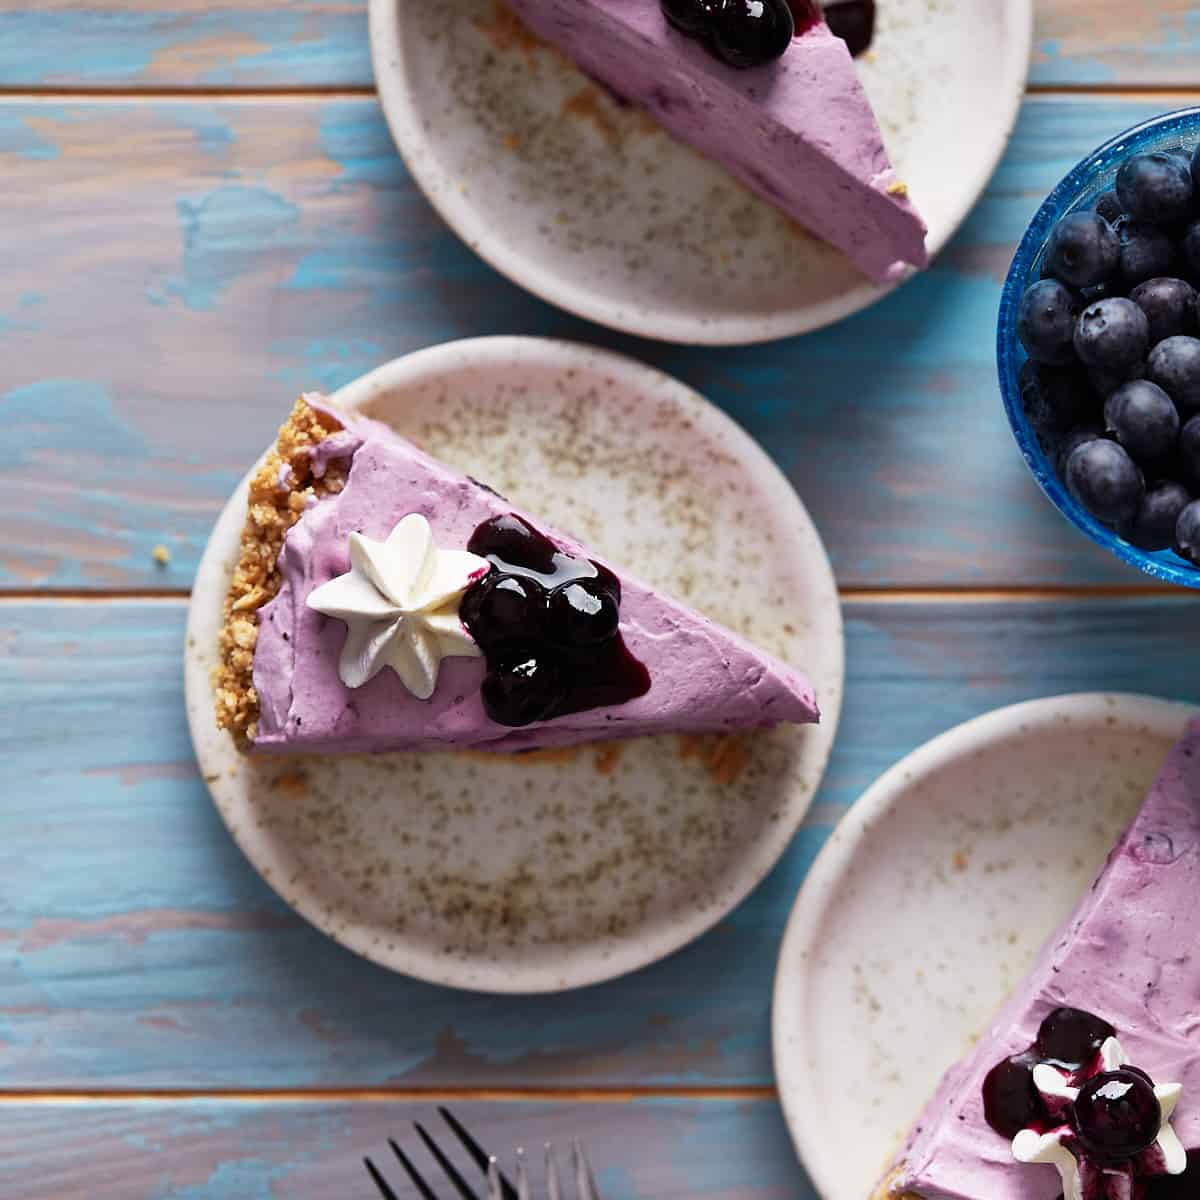 Slices of cheesecake plated on dessert plates